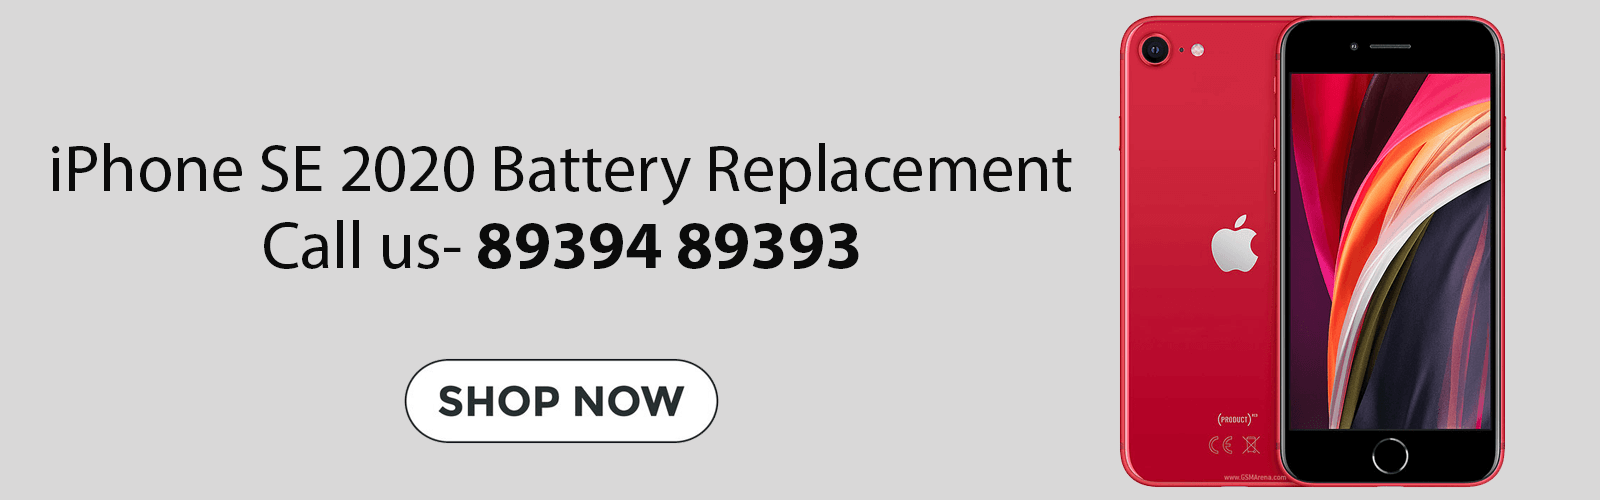 iPhone SE 2020 Battery Replacement Price Chennai